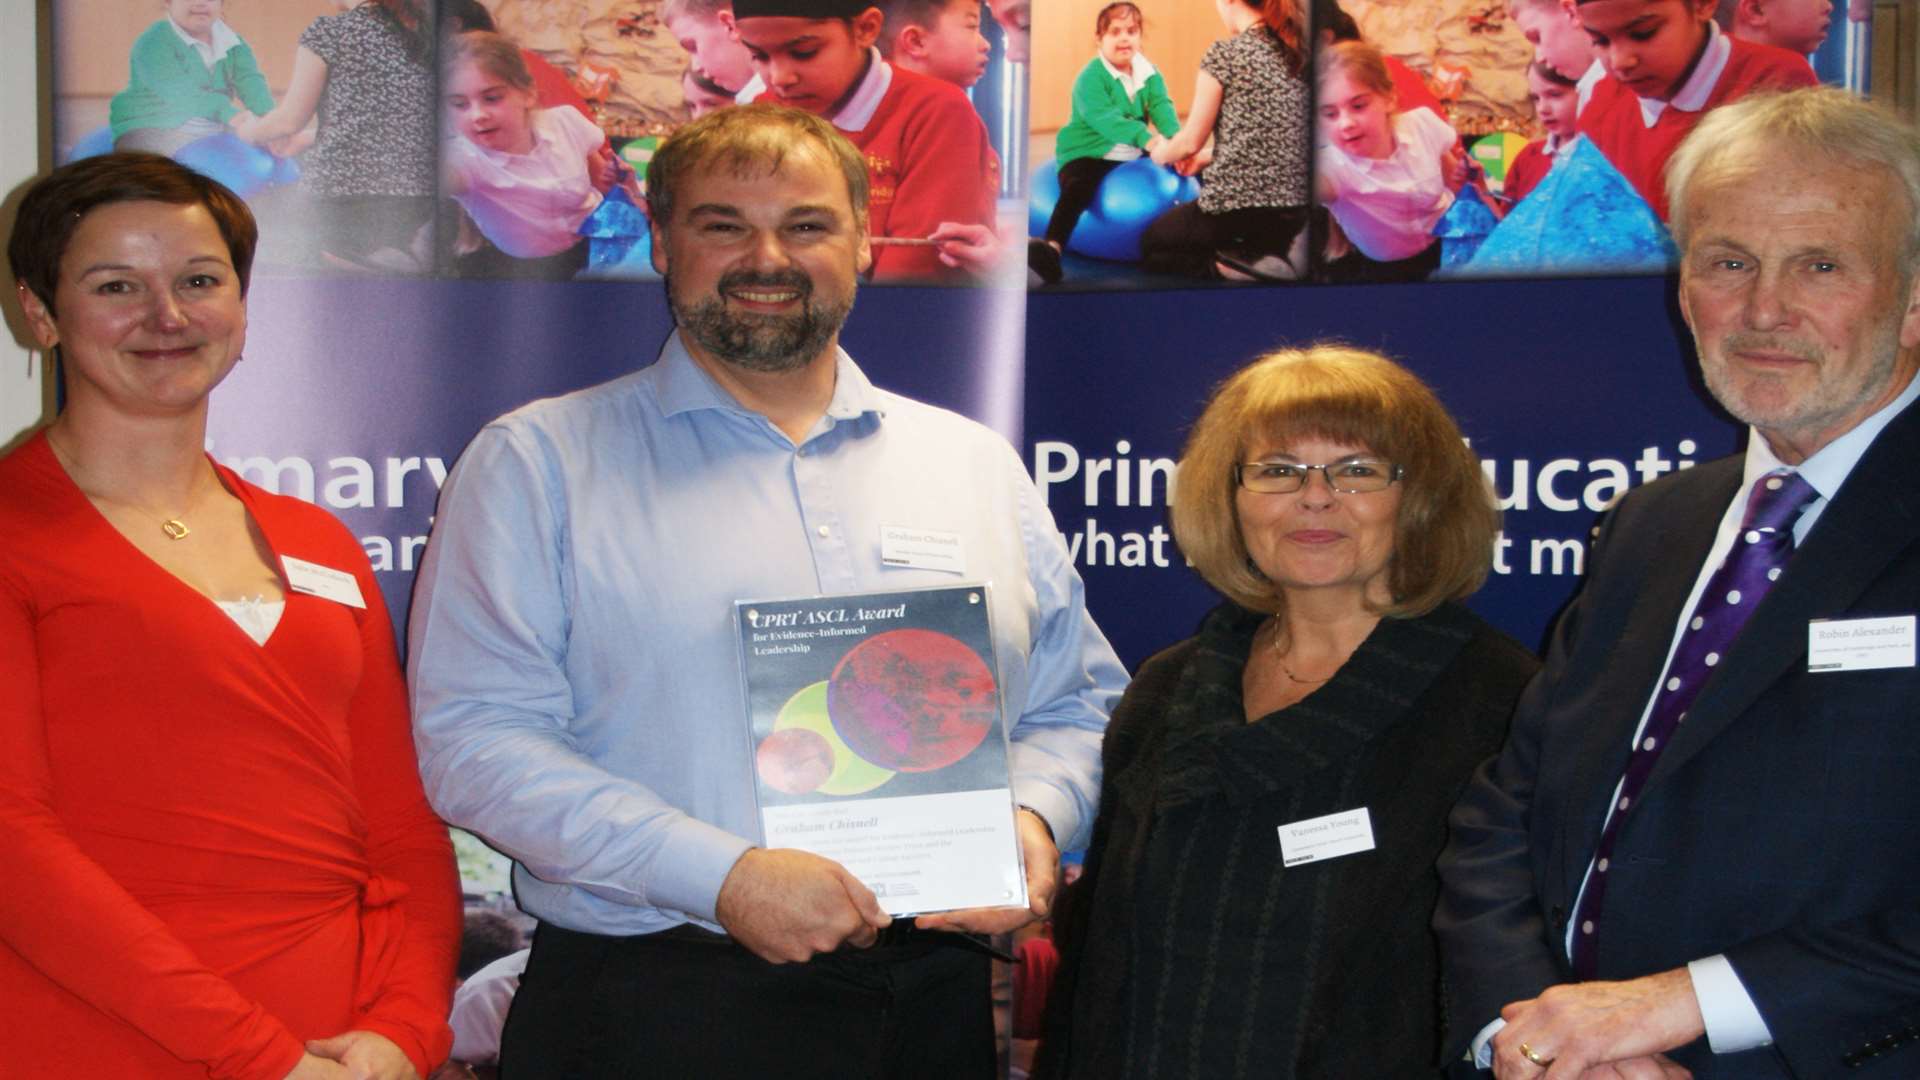 Graham Chisnell (centre left) receives his award from Julie McCullock from the Association of School and College Lecturers, Vanessa Young and Dr Robin Alexander